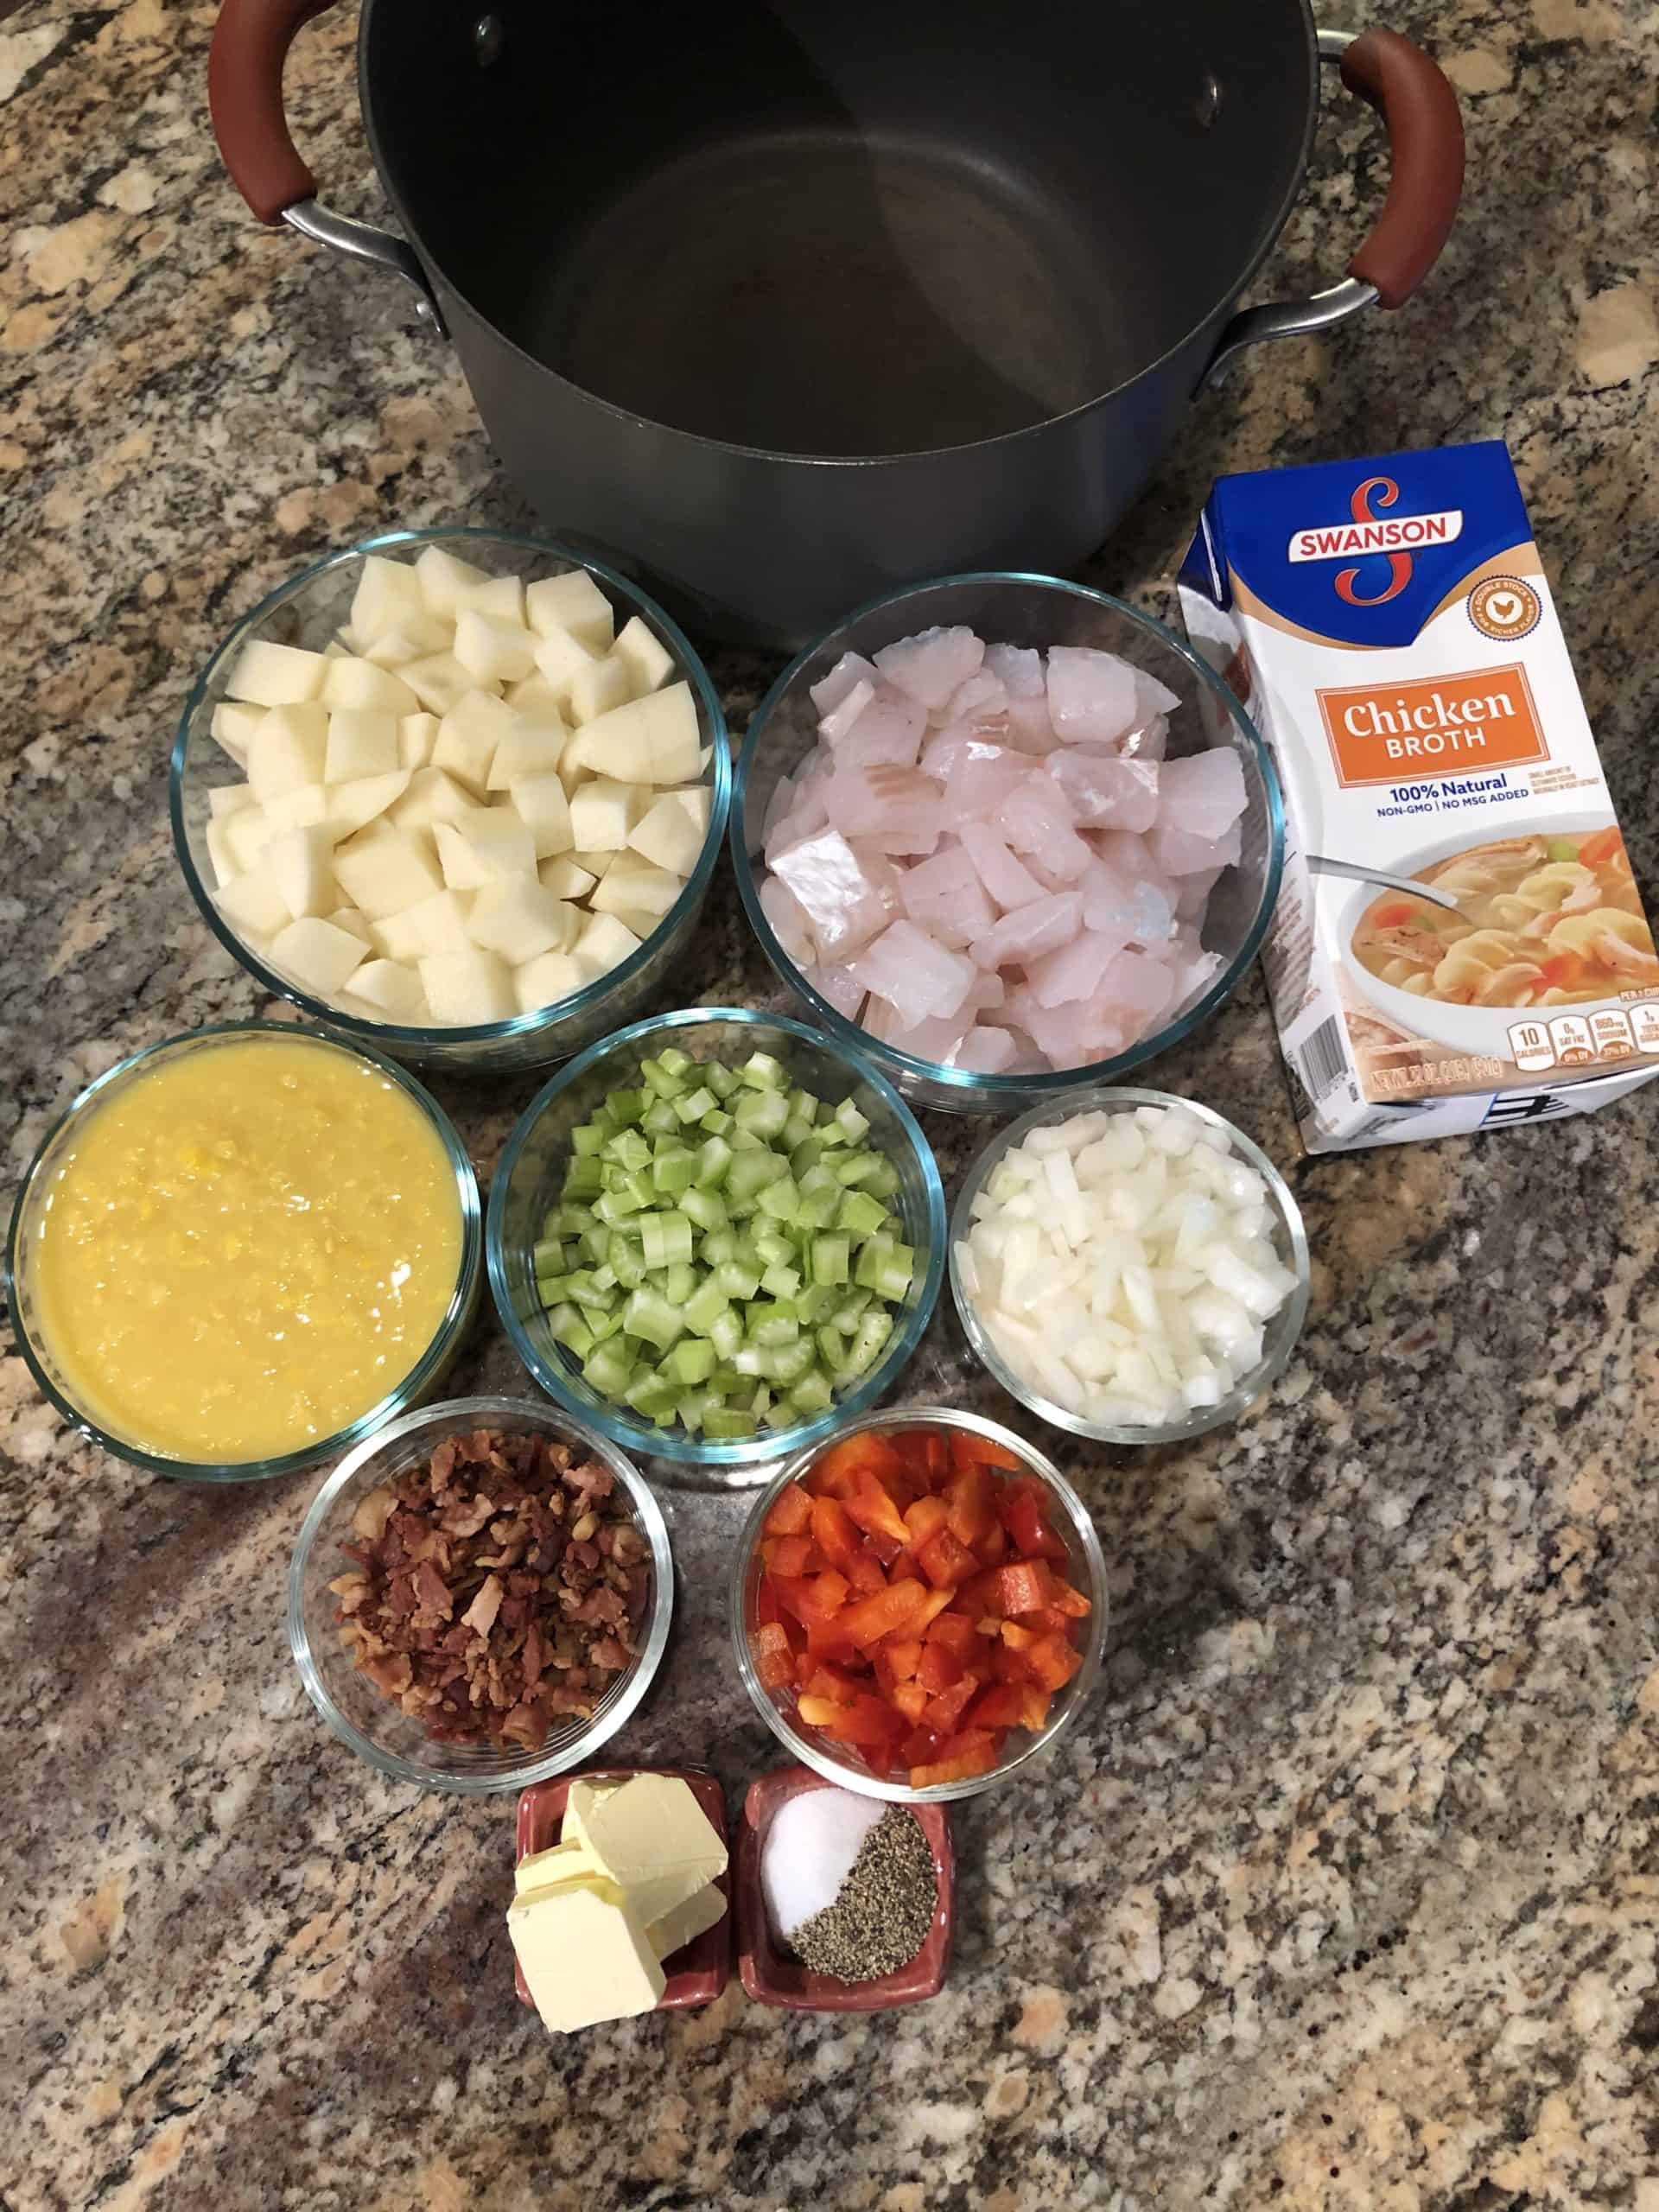 Fish Chowder ingredients - red peppers, celery, onions, potatoes, bacon bits, creamed corn, butter, salt and pepper, chicken stock, fish and large stock pot